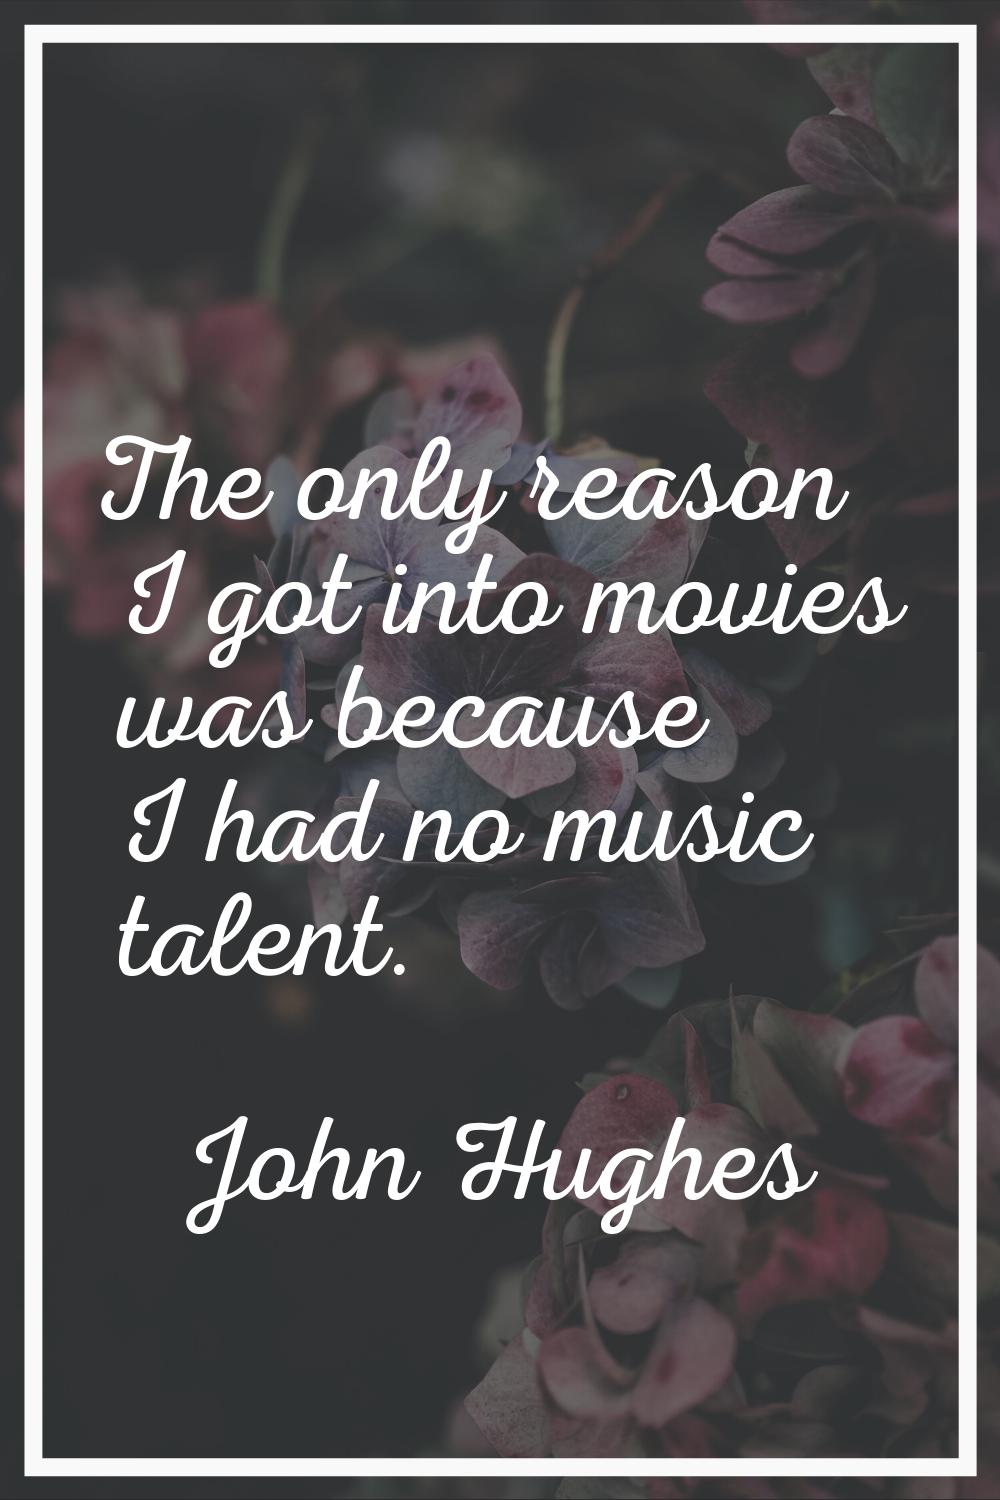 The only reason I got into movies was because I had no music talent.